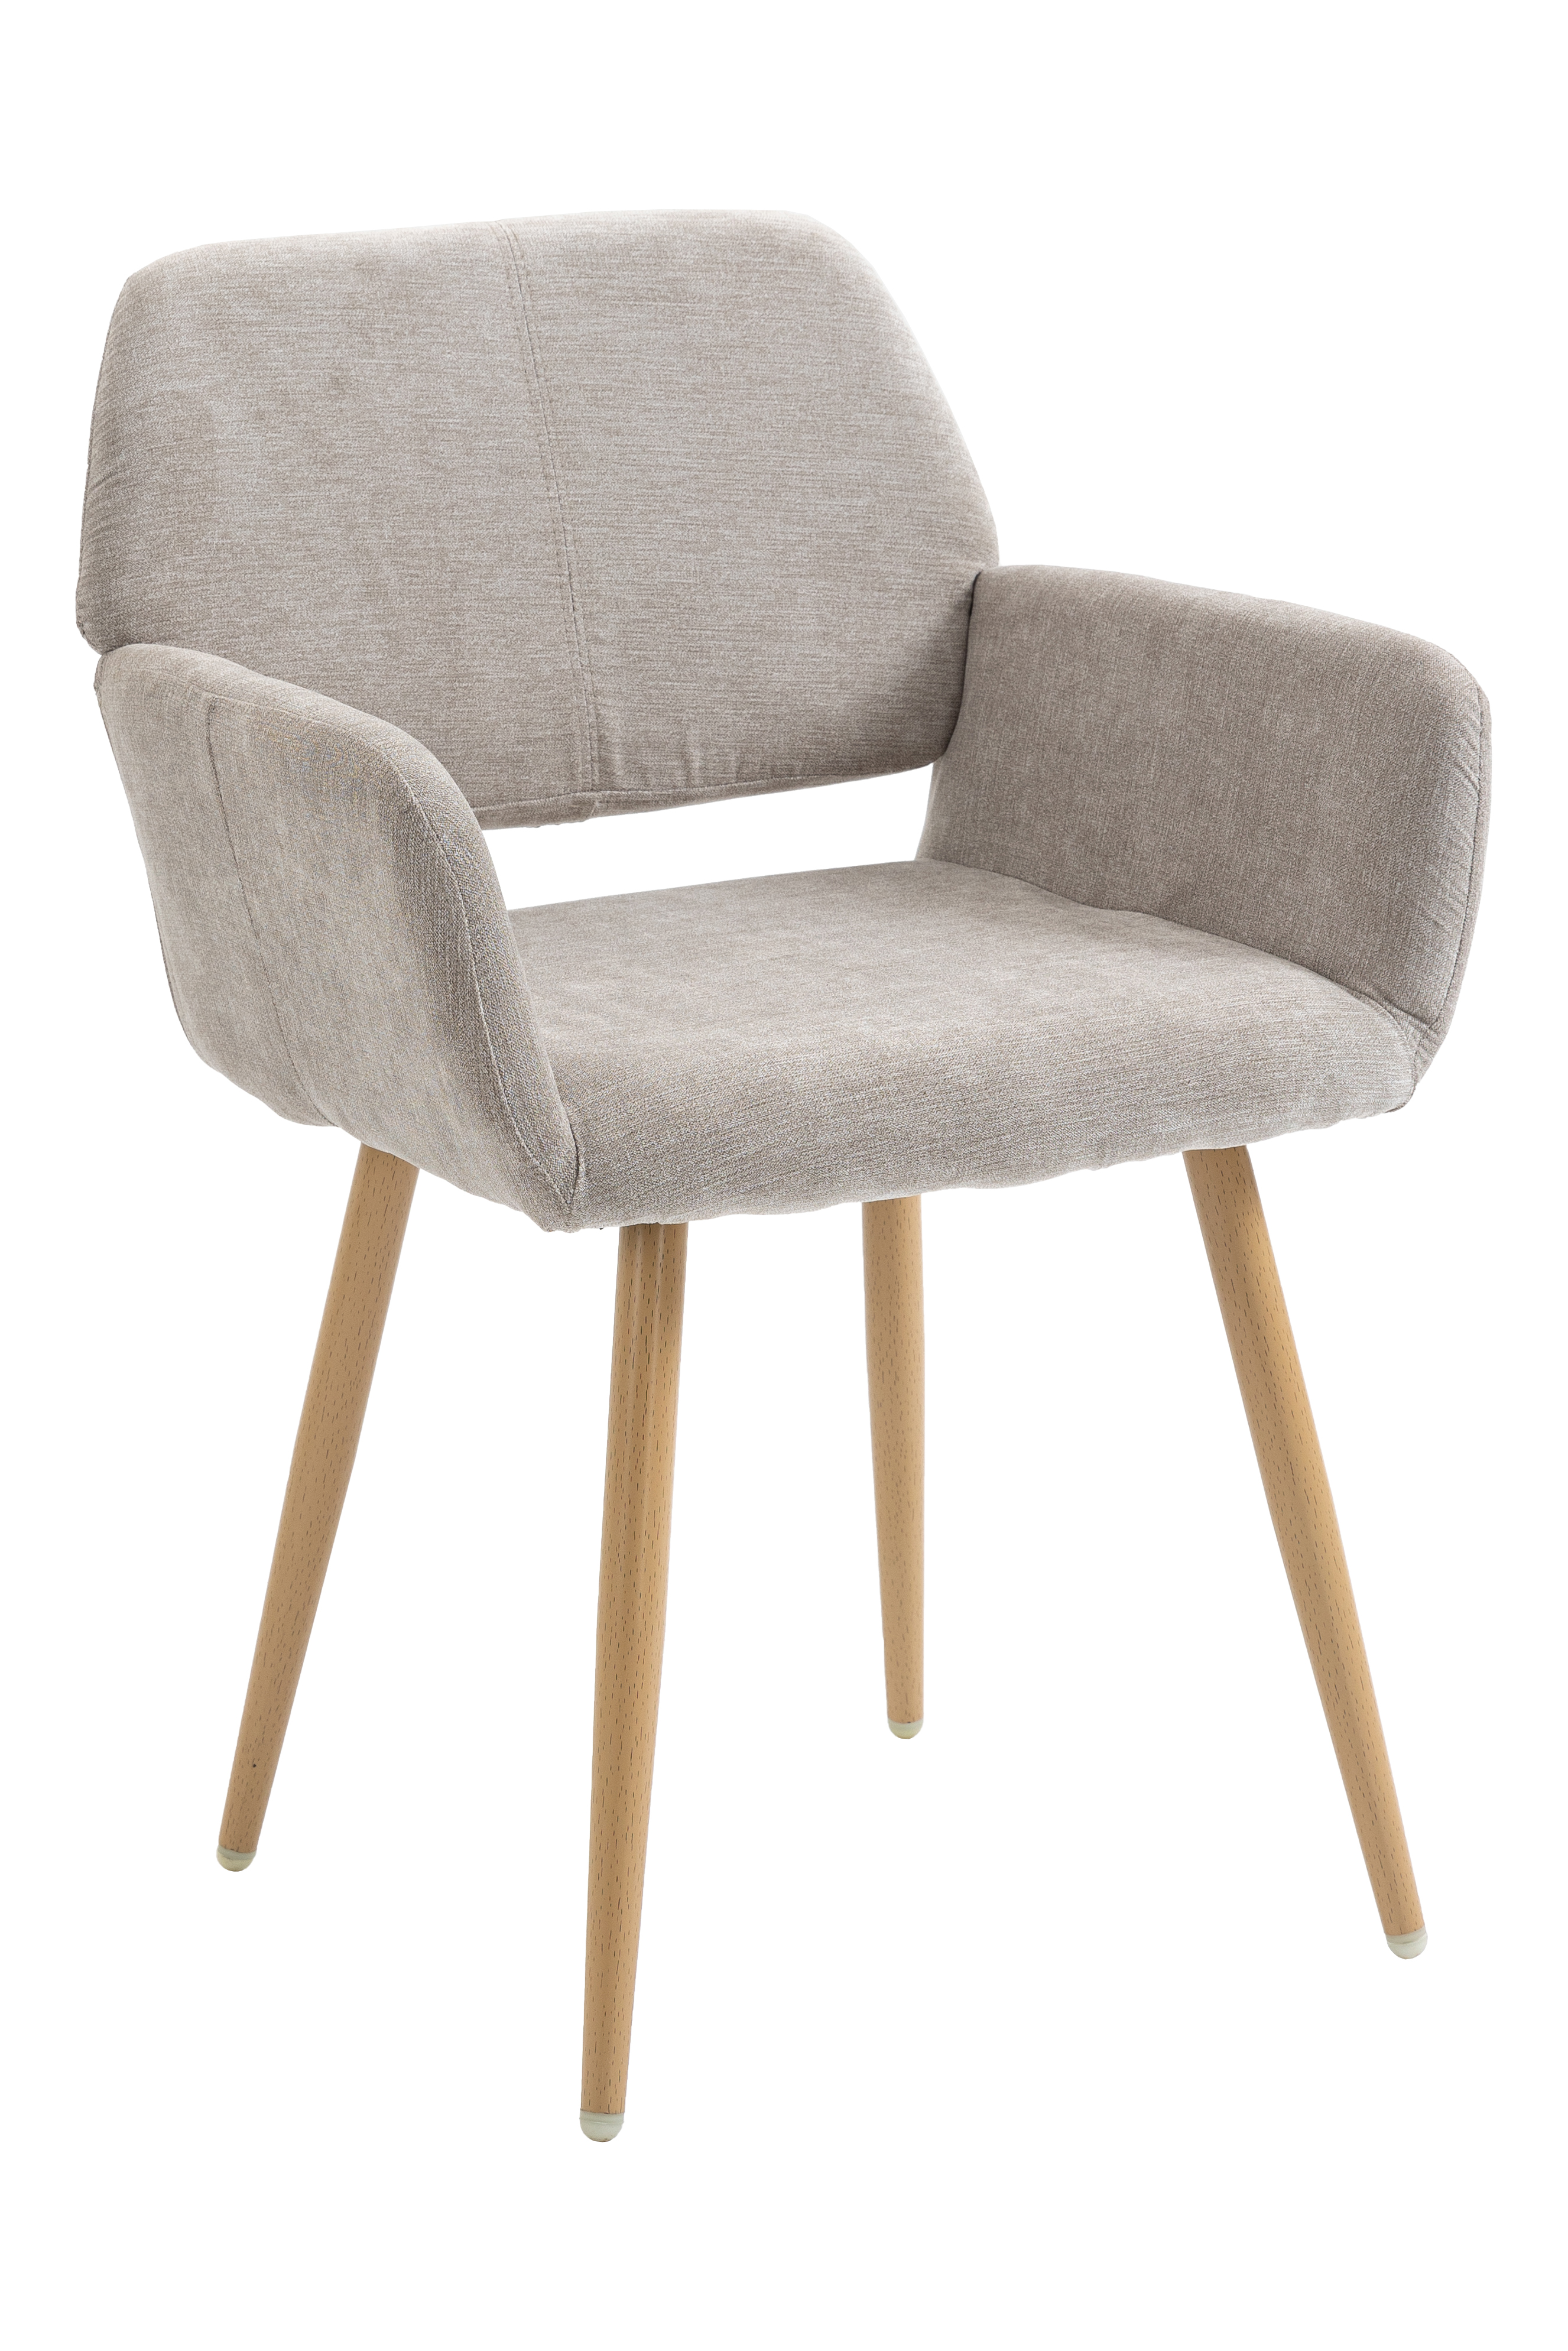 Fabric Upholstered Side Dining Chair with Metal Leg(Beige fabric+Beech Wooden Printing Leg),KD backrest-Boyel Living